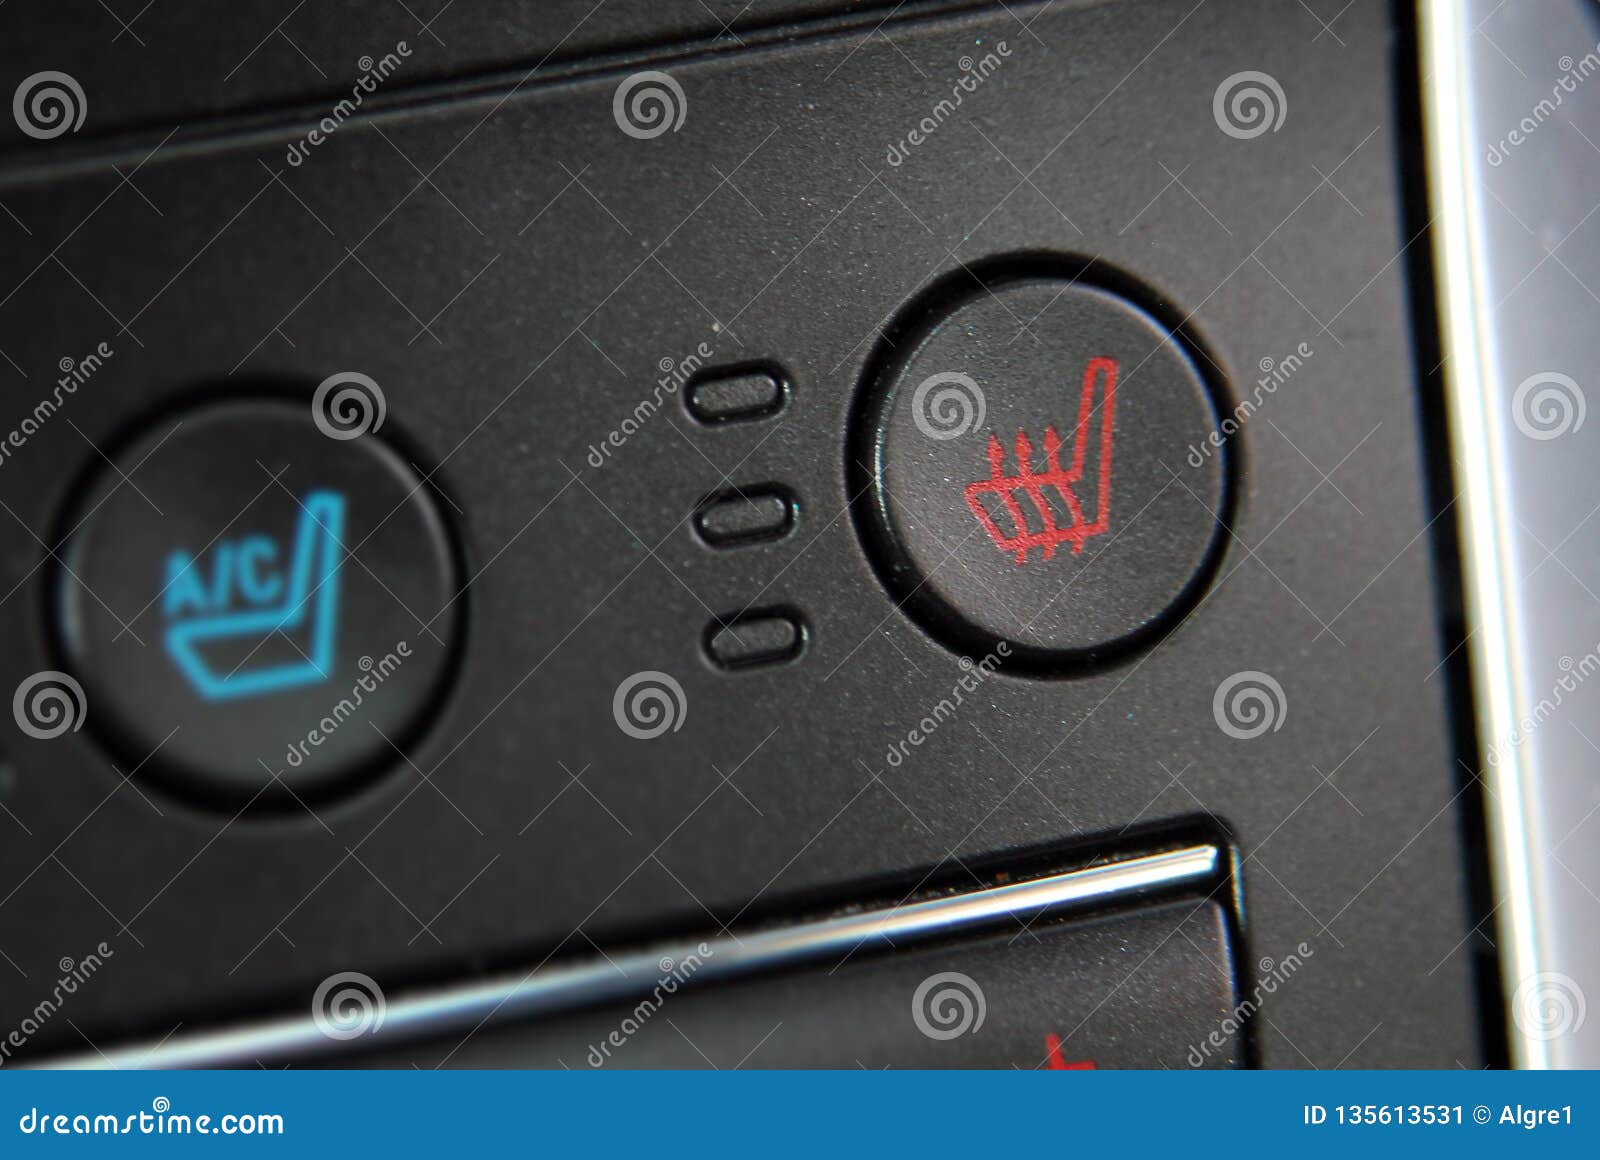 https://thumbs.dreamstime.com/z/switch-heating-car-seats-to-activate-heater-135613531.jpg